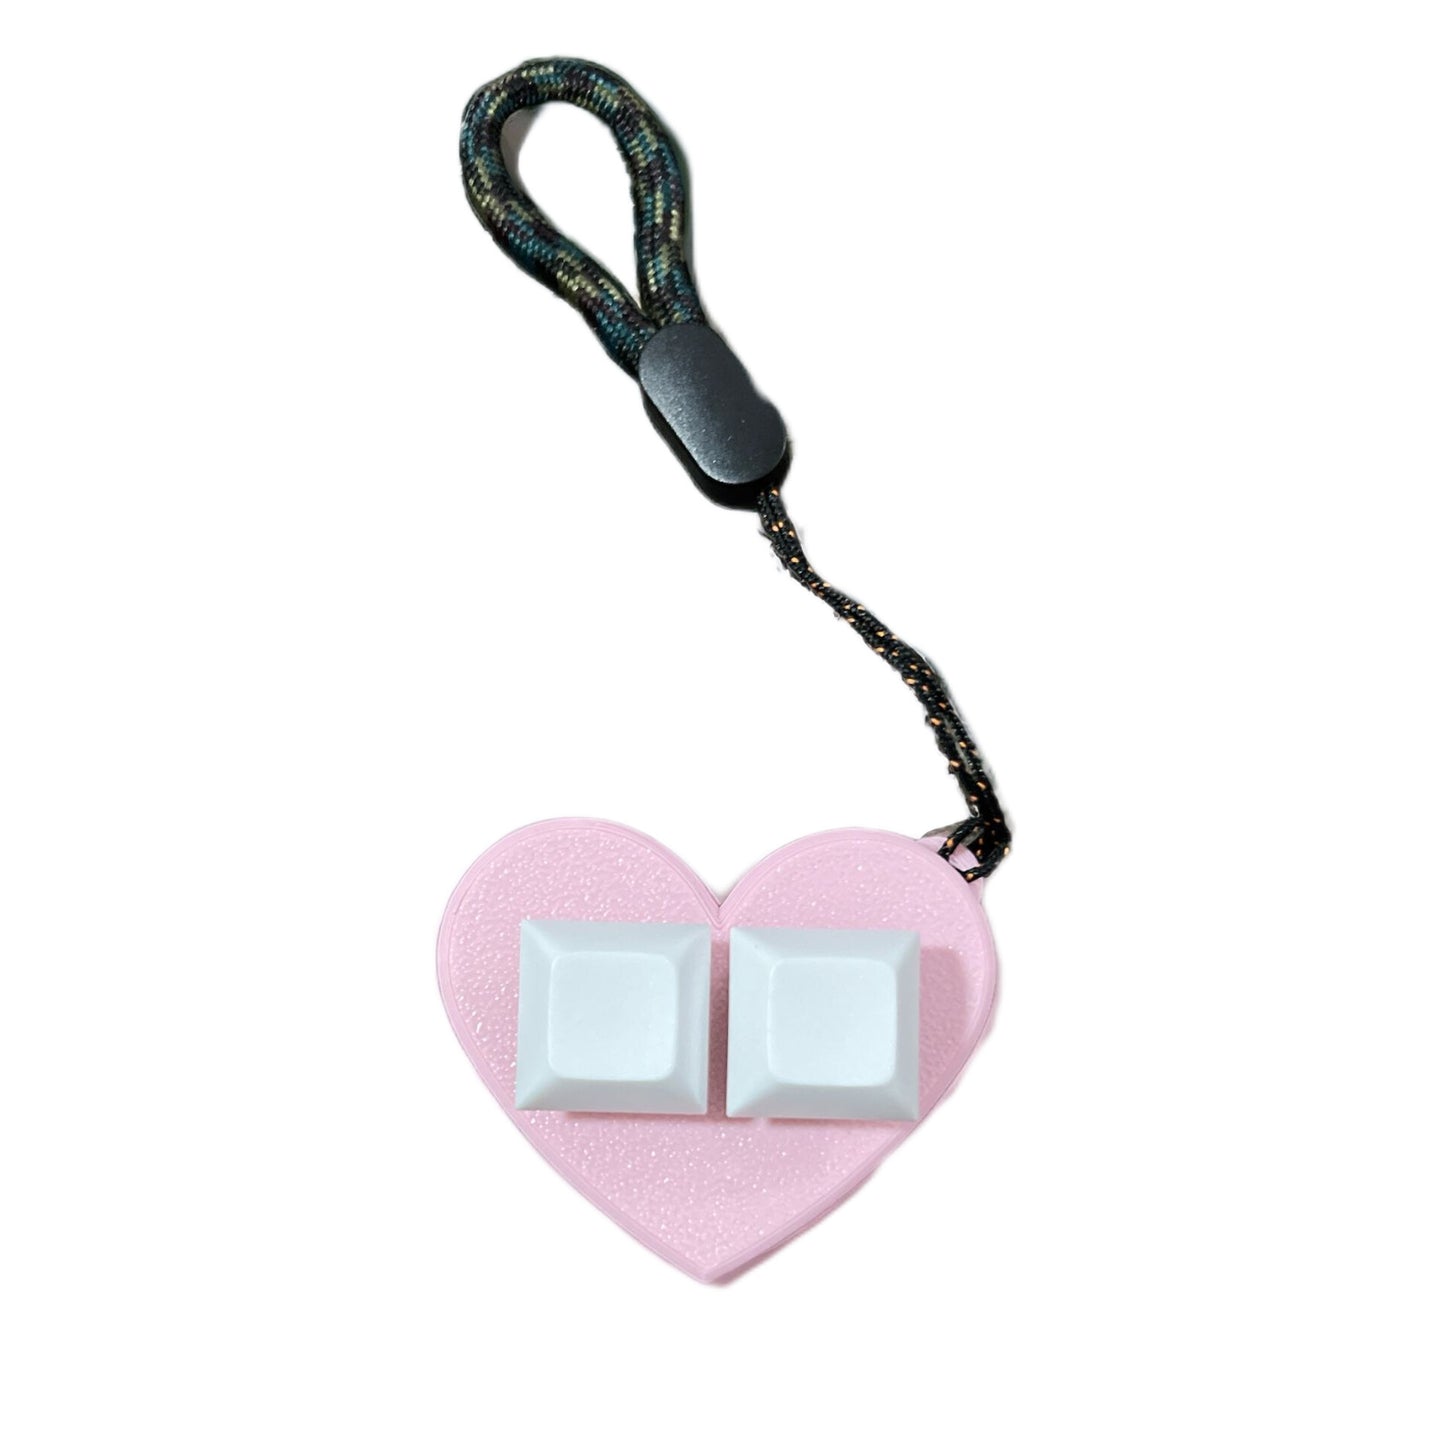 It's a 3D heart-shaped finger fidget. With keyboard keys to keep your fingers busy and it is on a keychain and it's pink with light blue keys.